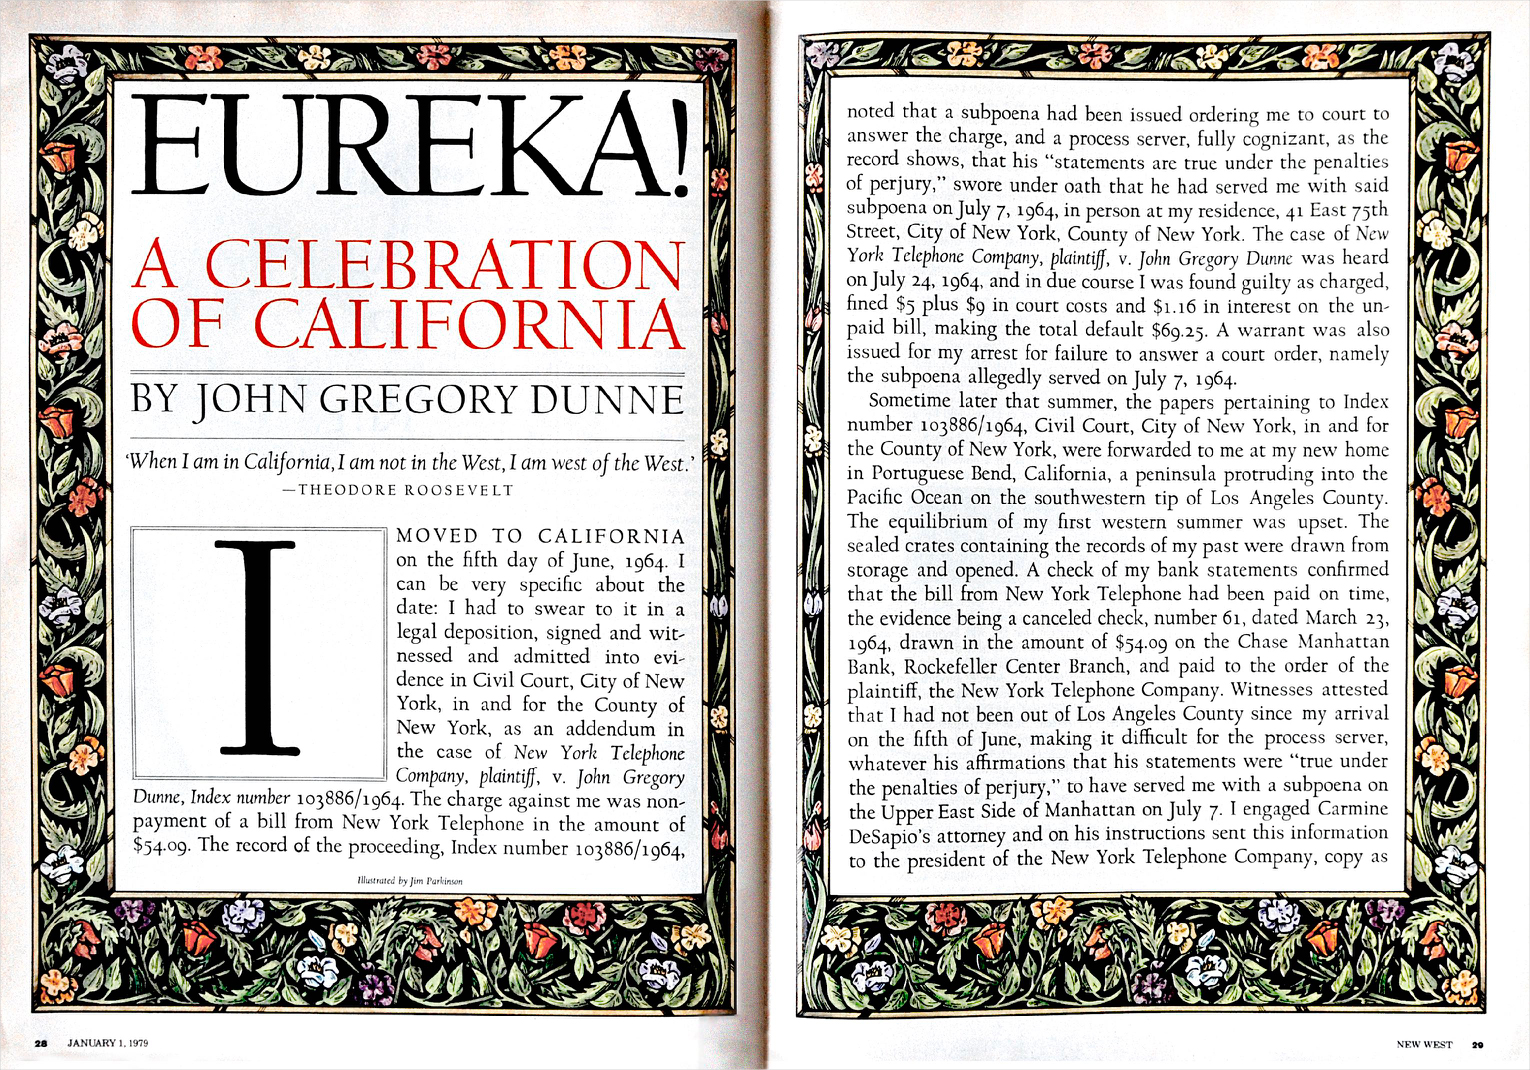 Spread from New West magazine (1979) featuring John Gregory Dunne’s “Eureka! A Celebration of California.” Set in Californian.